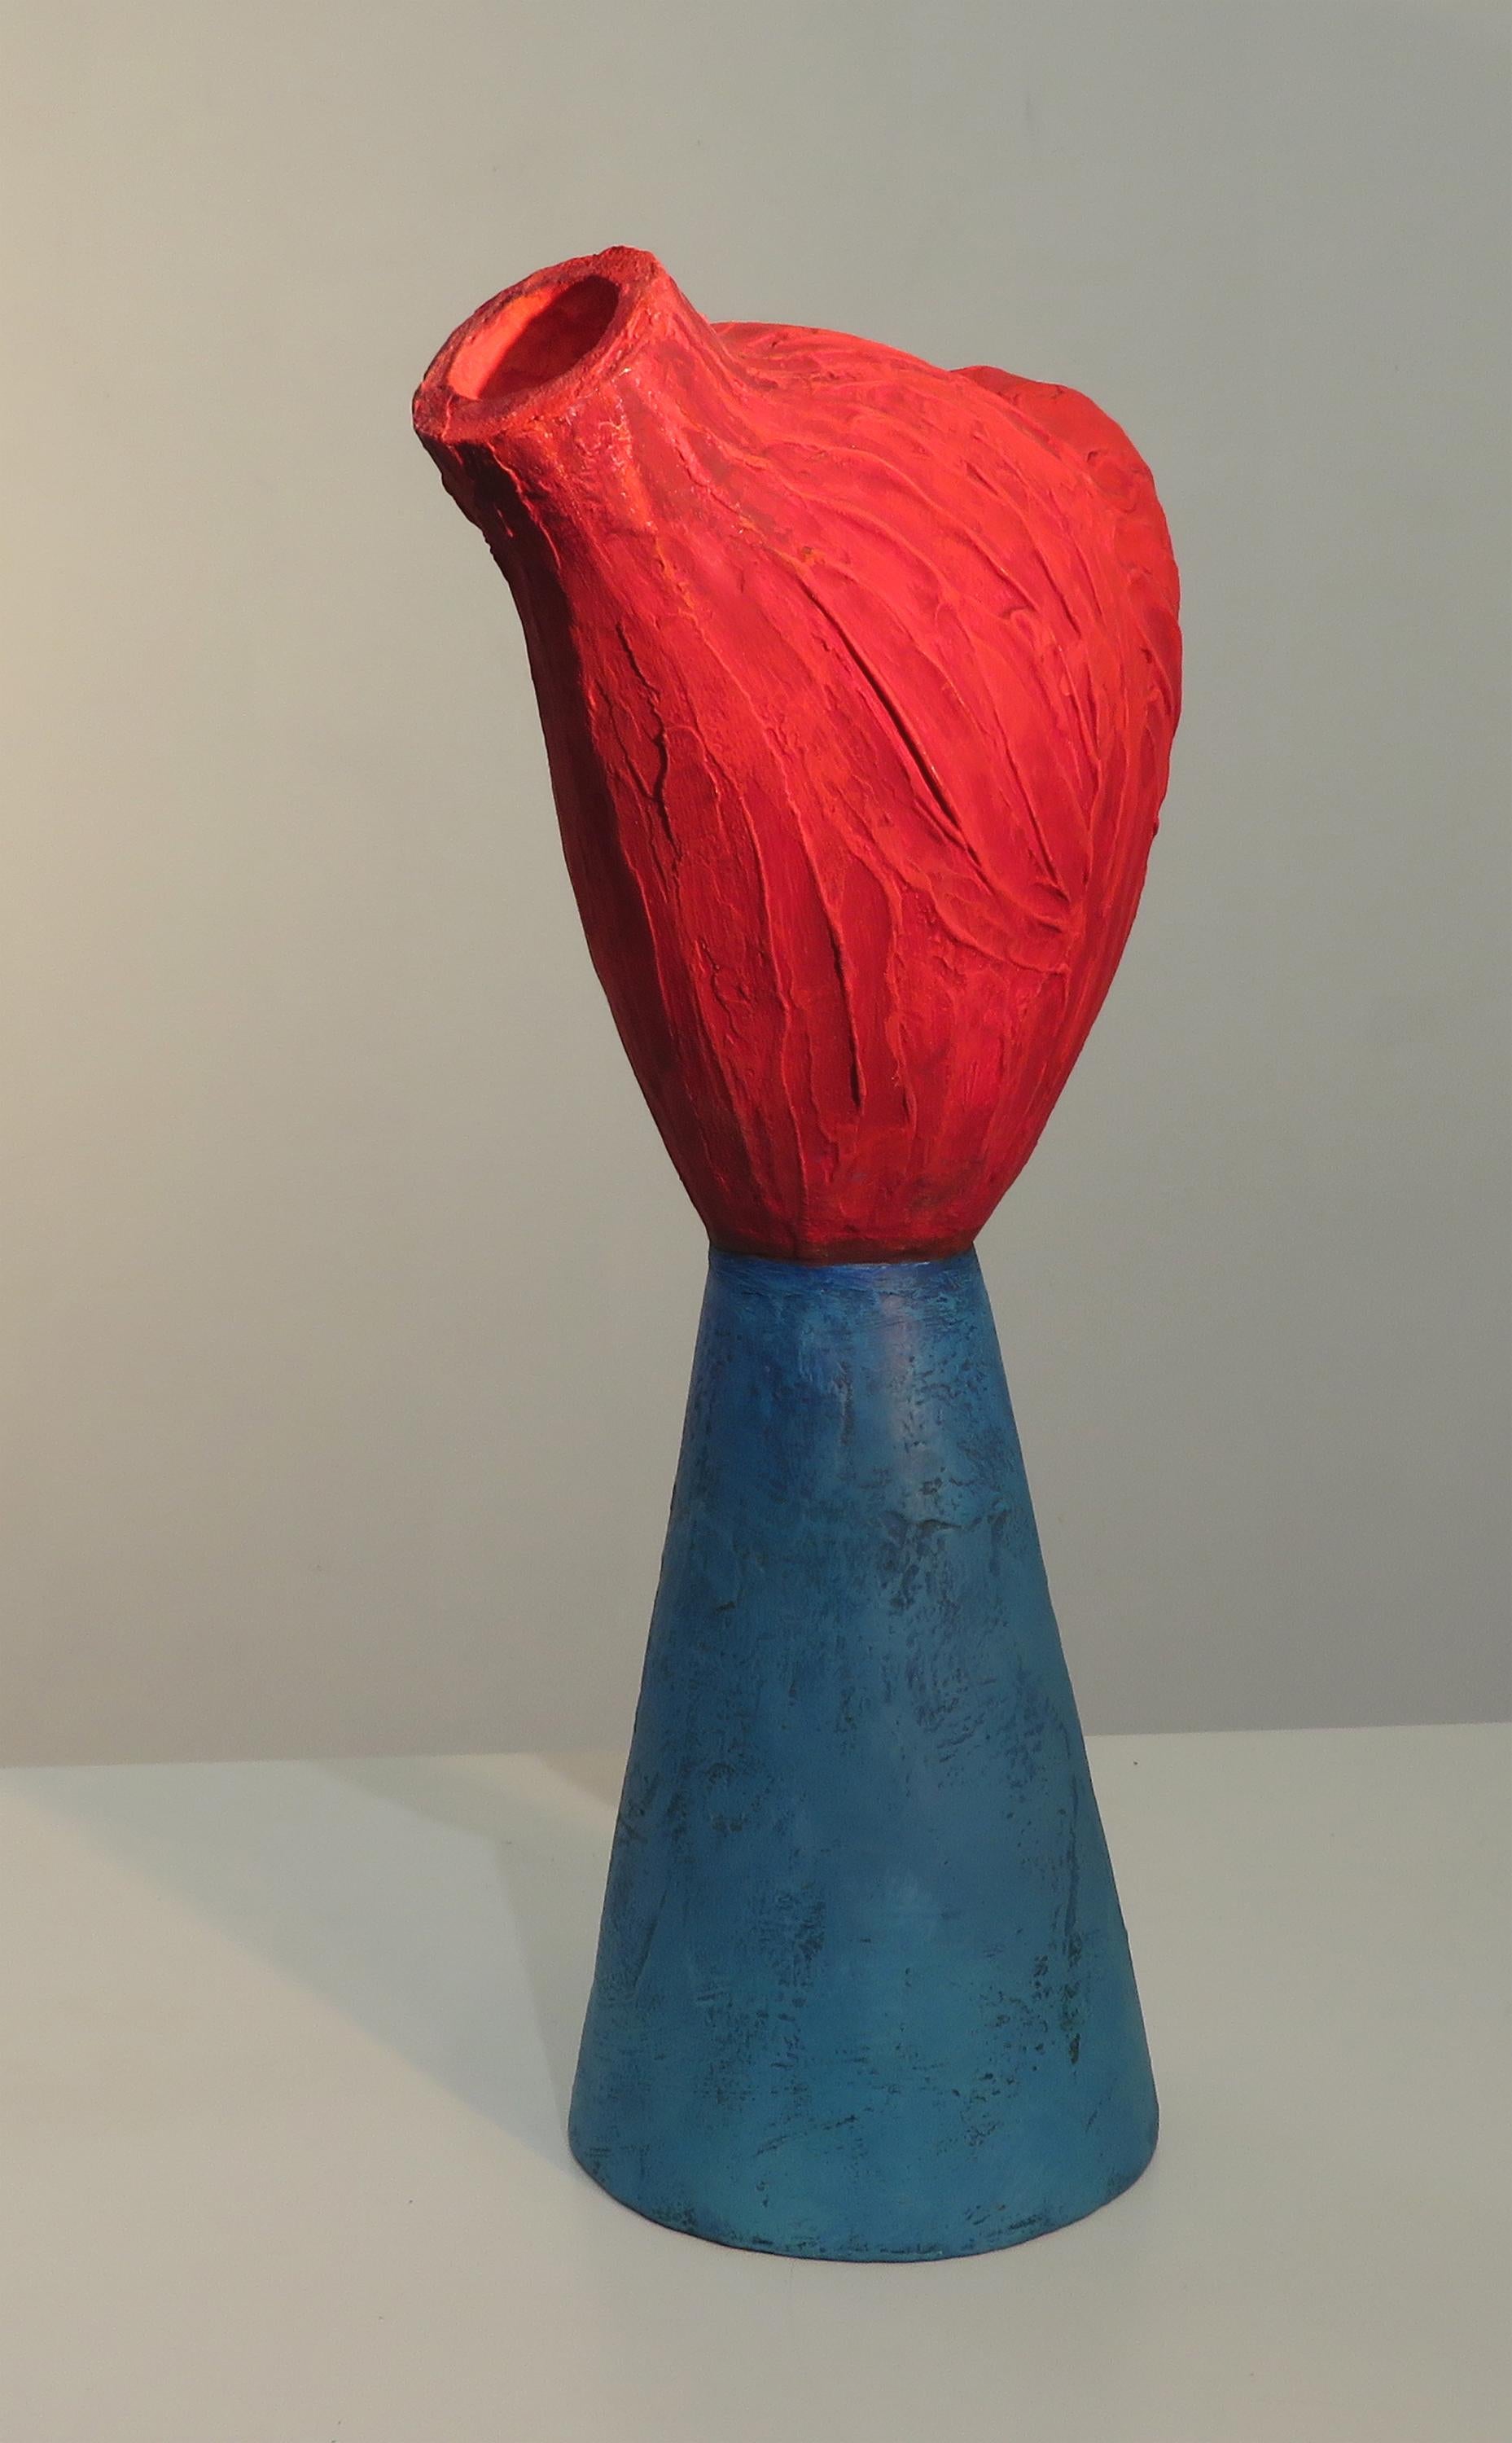 Paradox contemplates the conflicting passions of body, heart and mind in brilliant orange, red, blue and green. The artist’s work explores the marriage of painting and sculpture in this hybrid. Ambiguous yet familiar, it offers opportunity for